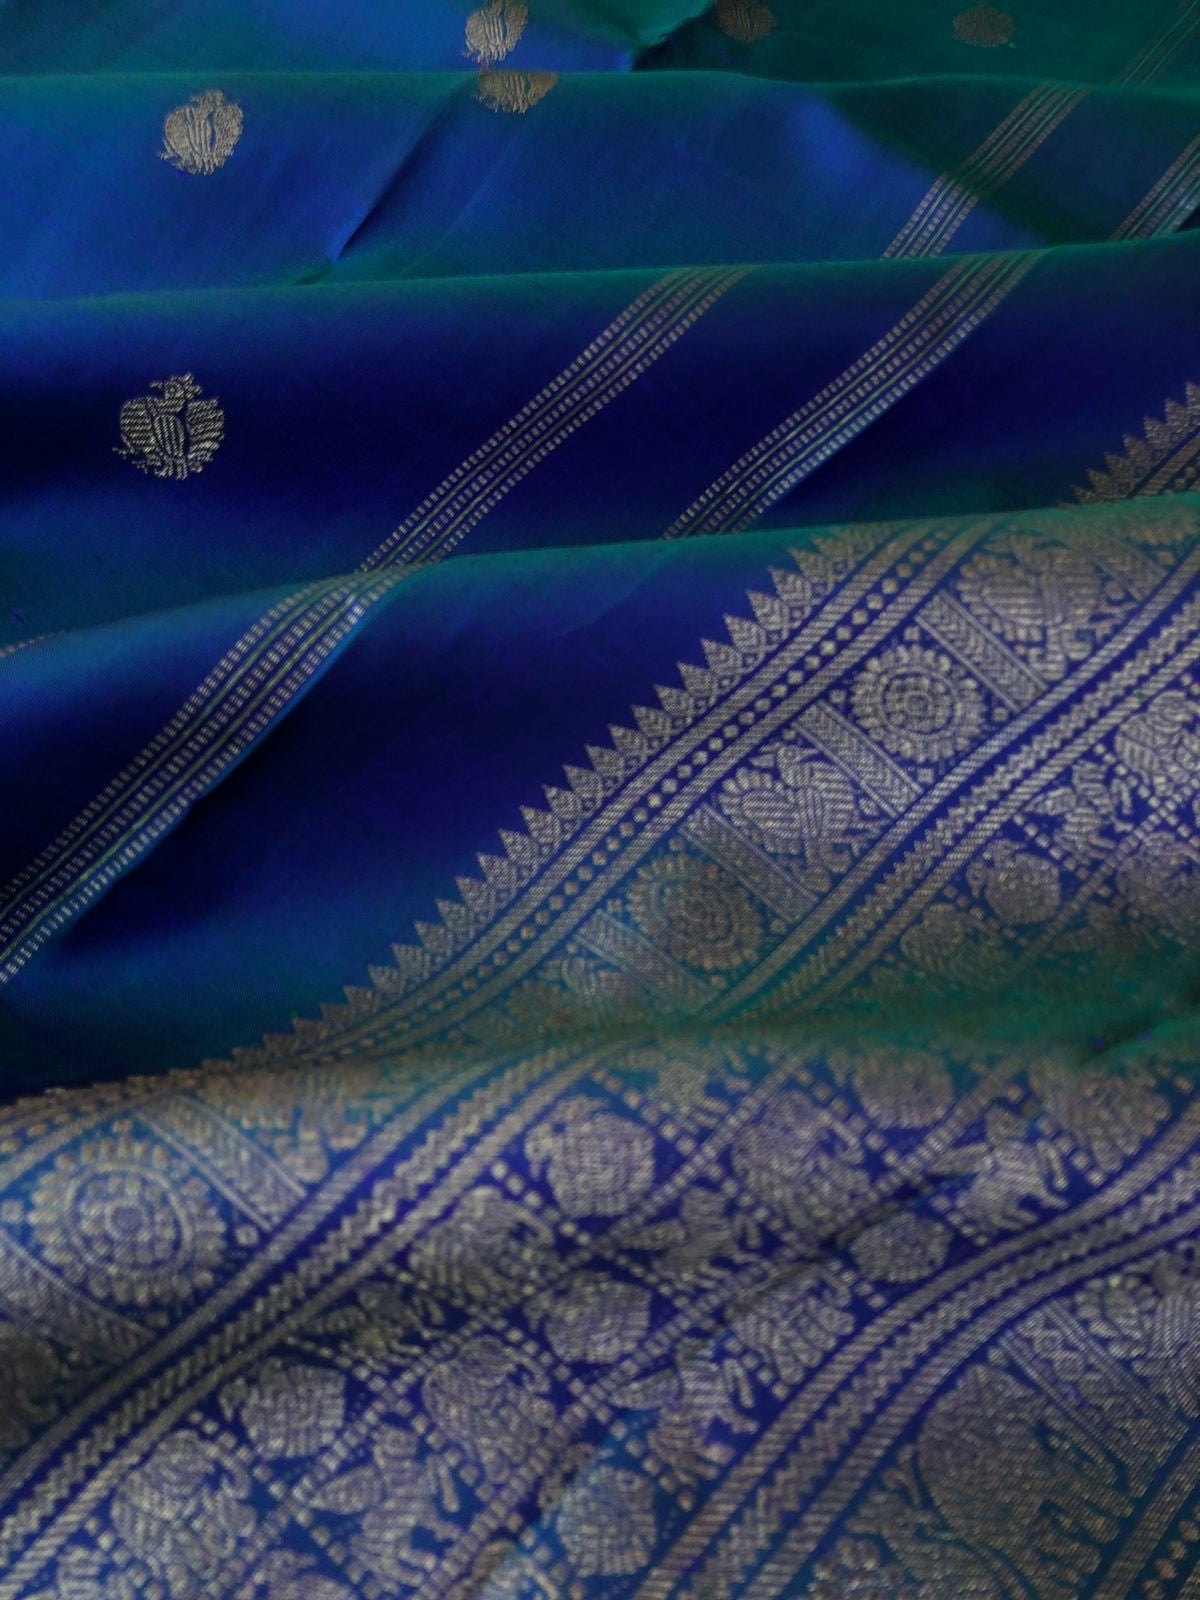 Tara - Traditional Colours on Traditional Kanchivarams - the best of dual to mayil kaluthu ( peacock neck tone blue green ) with solid gold zari woven pallu and borders